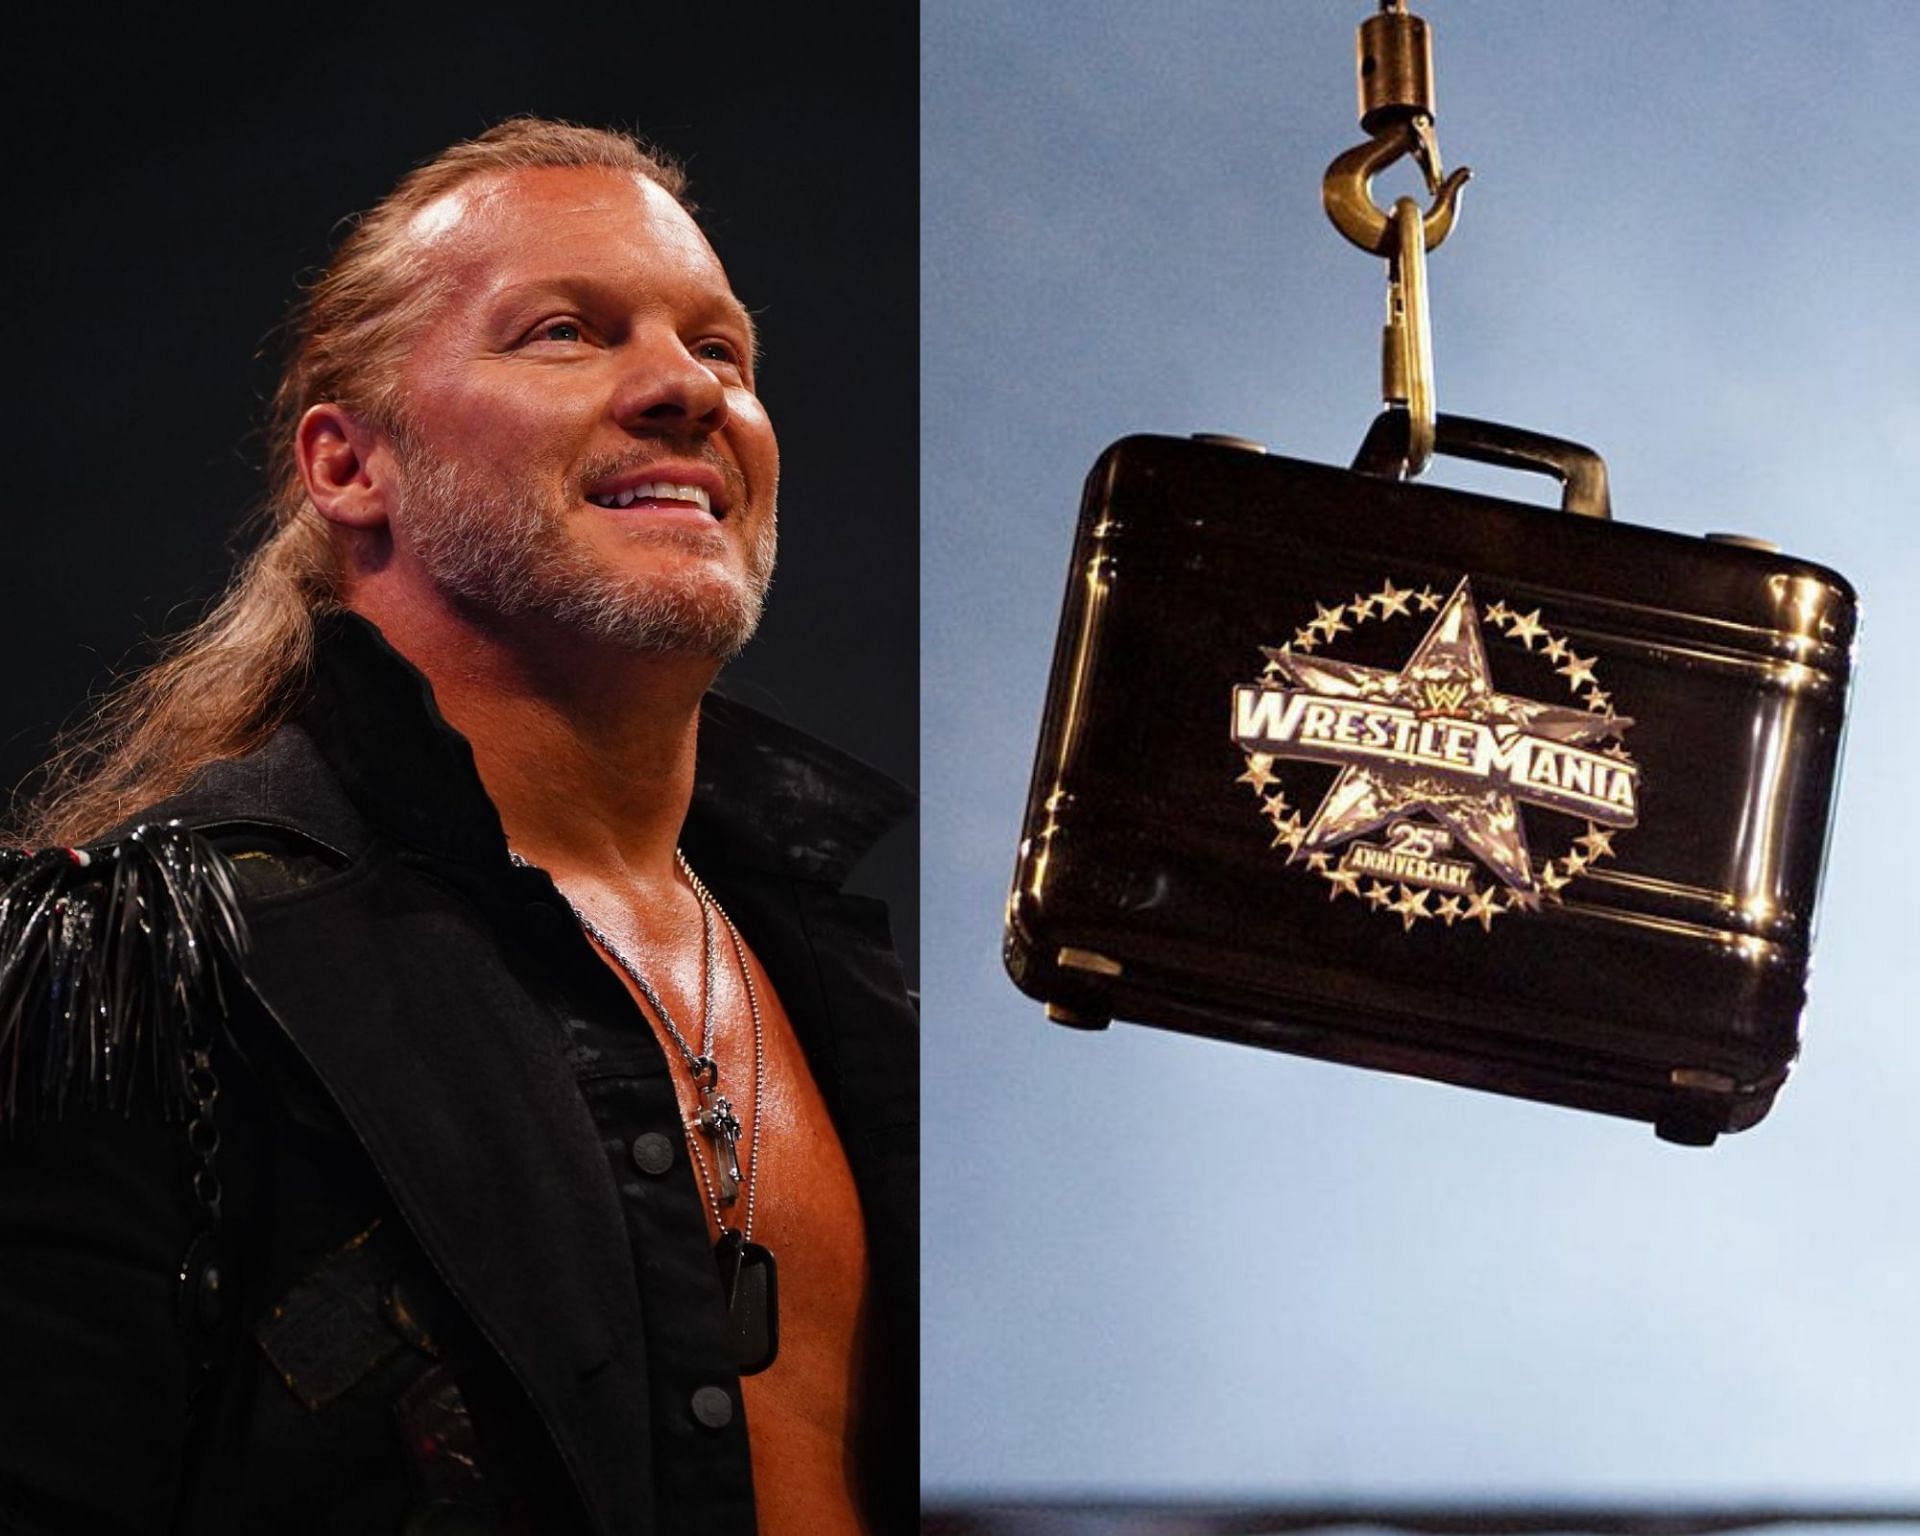 The Money in the Bank match was Chris Jericho&#039;s idea